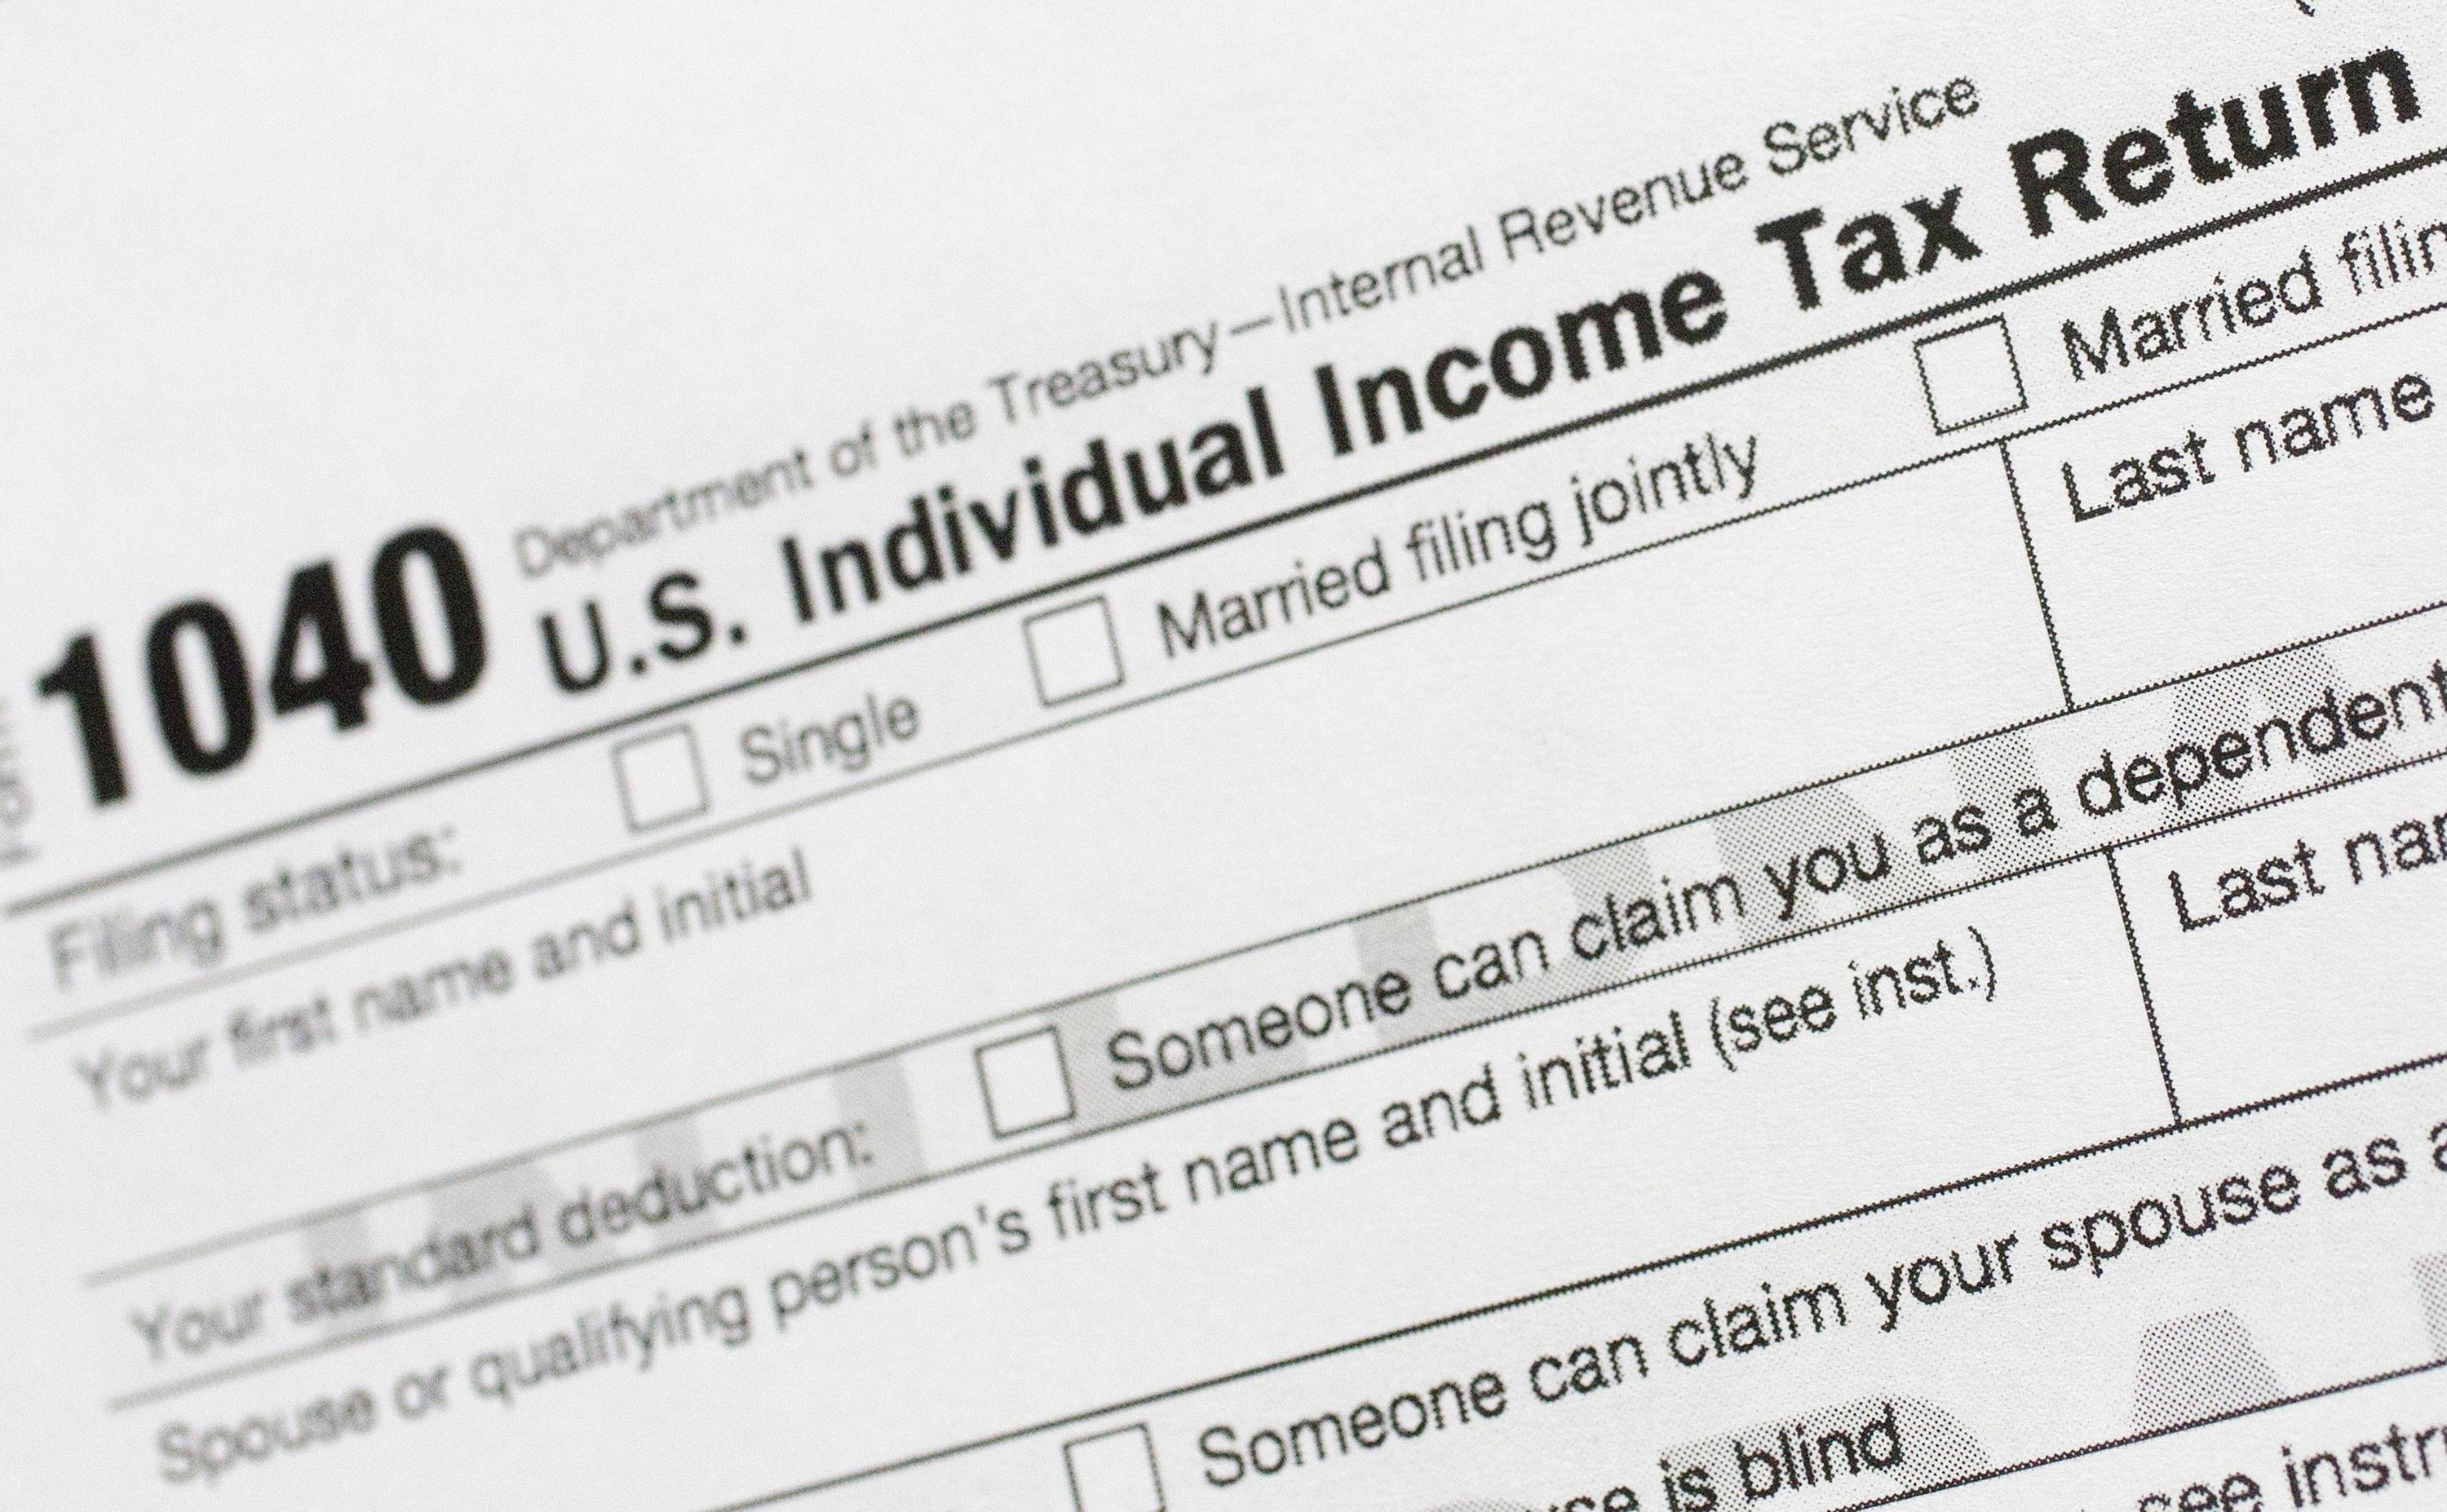 New push on USrun free electronic taxfiling system for all